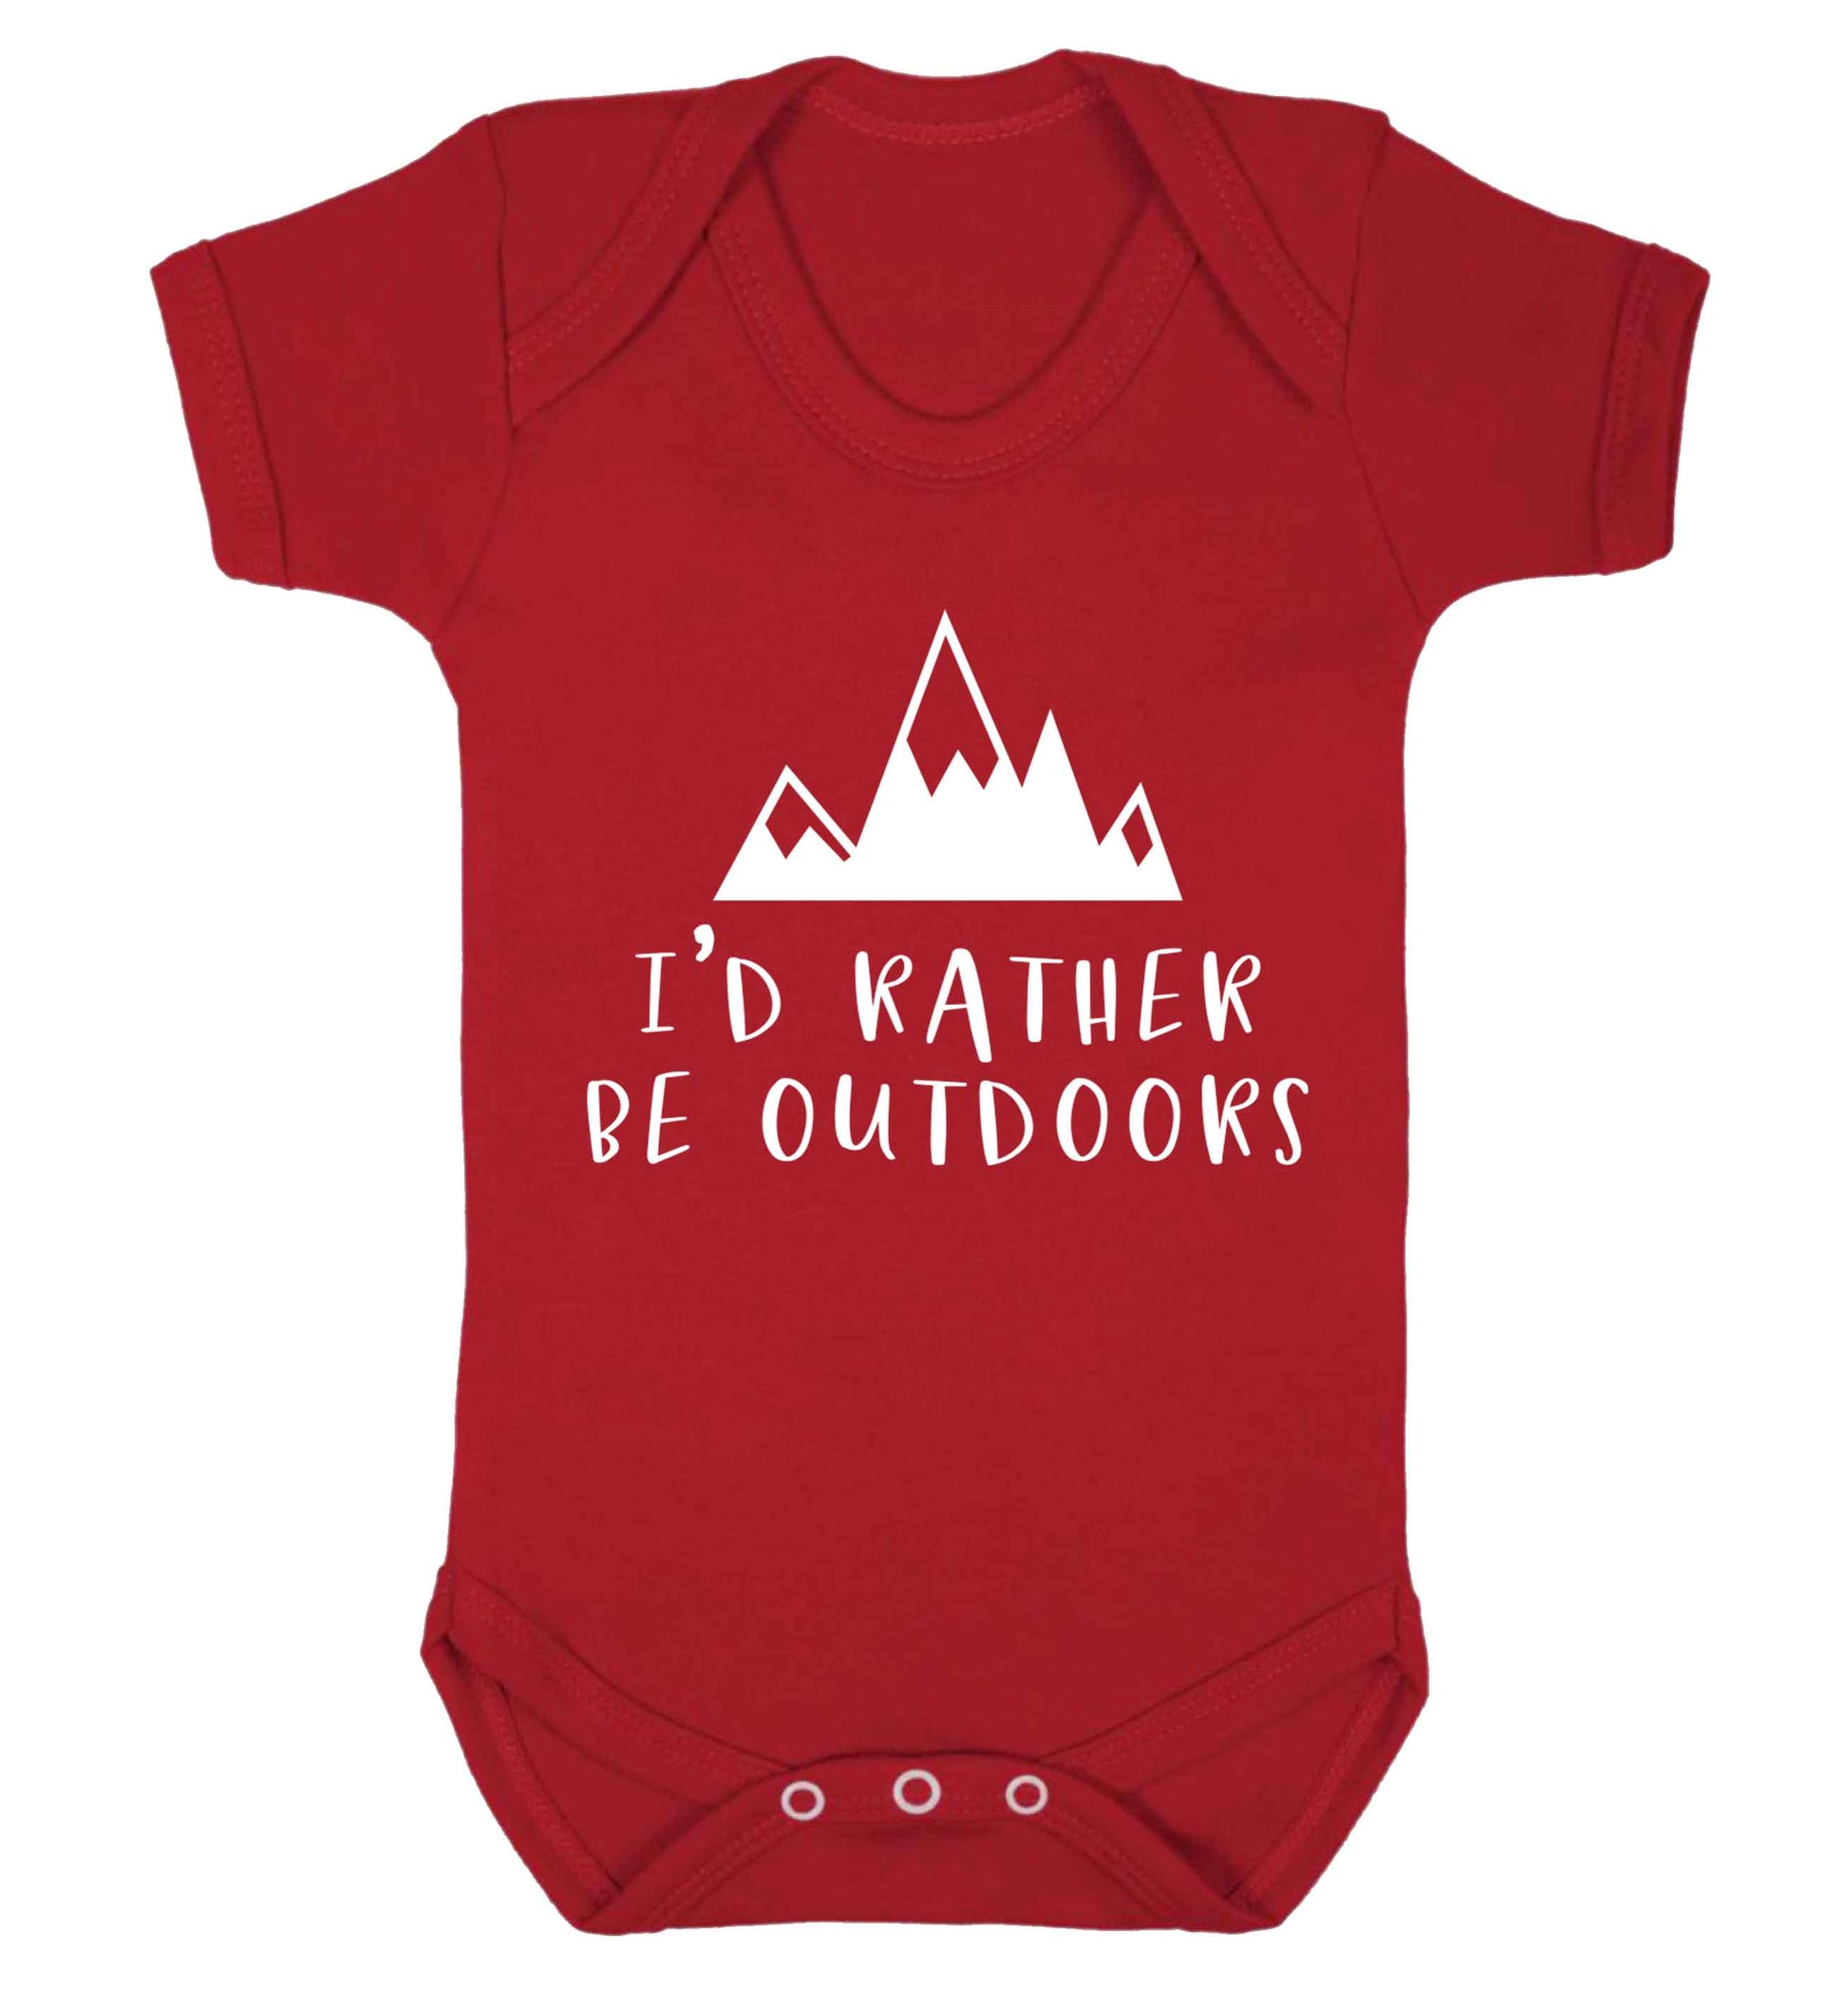 I'd rather be outdoors Baby Vest red 18-24 months